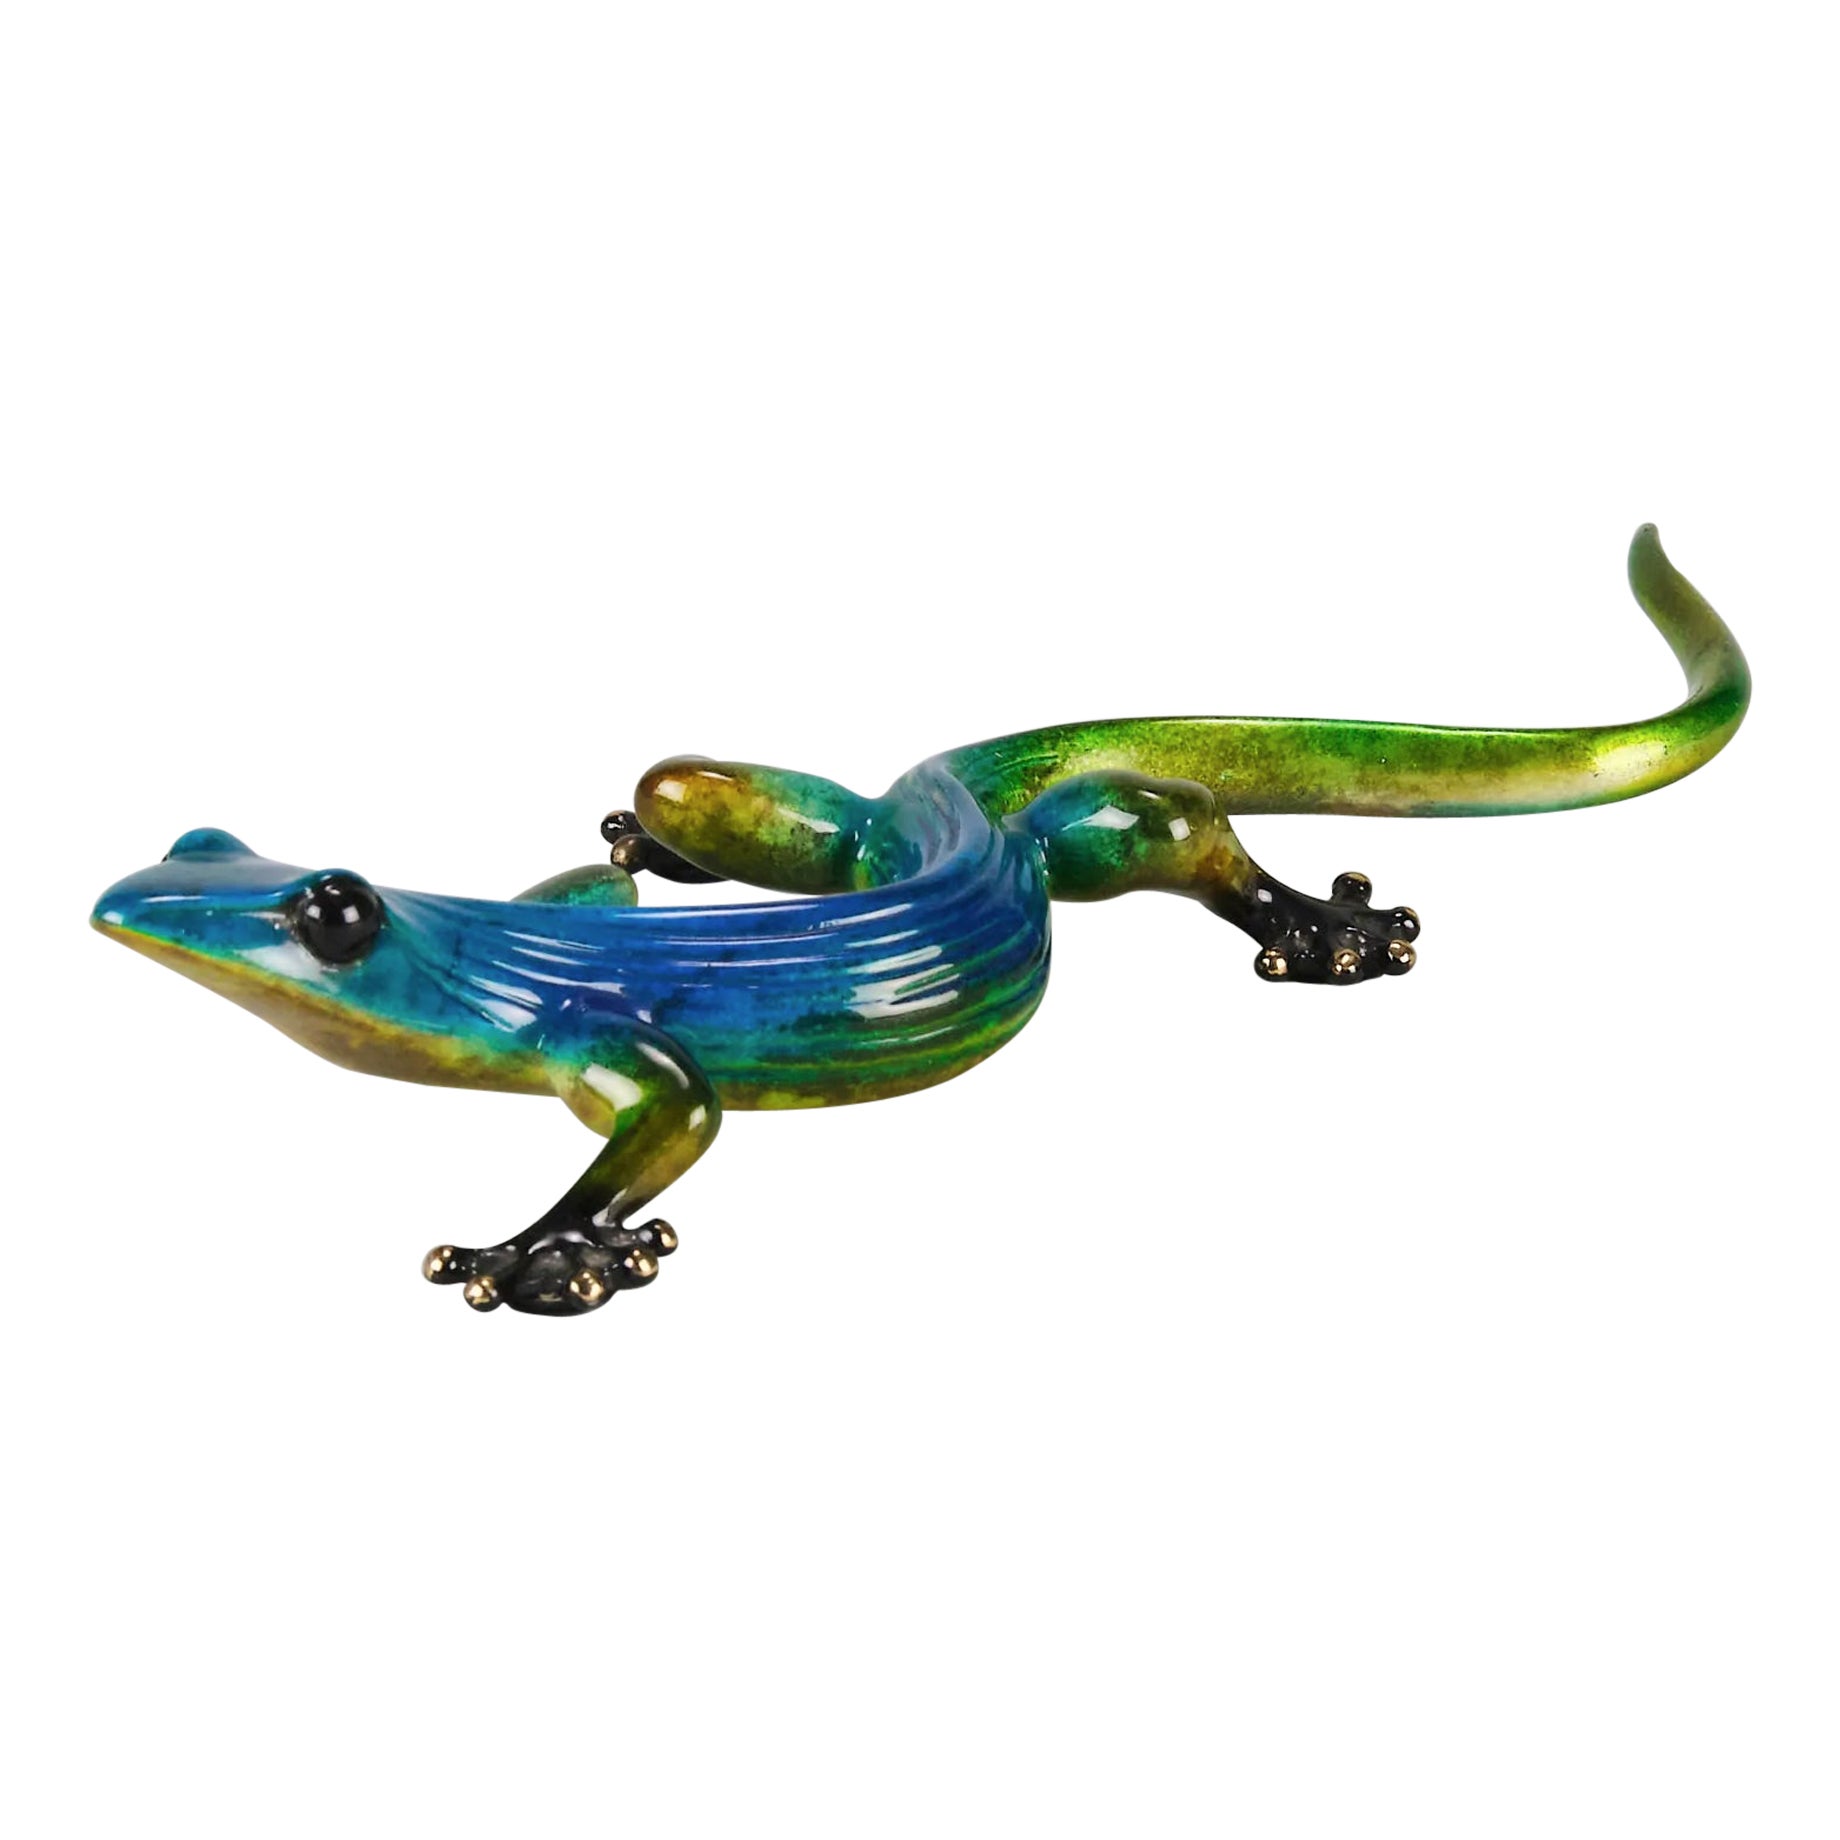 Limited Edition Bronze Entitled "Margarita Gecko" by Tim Cotterill For Sale